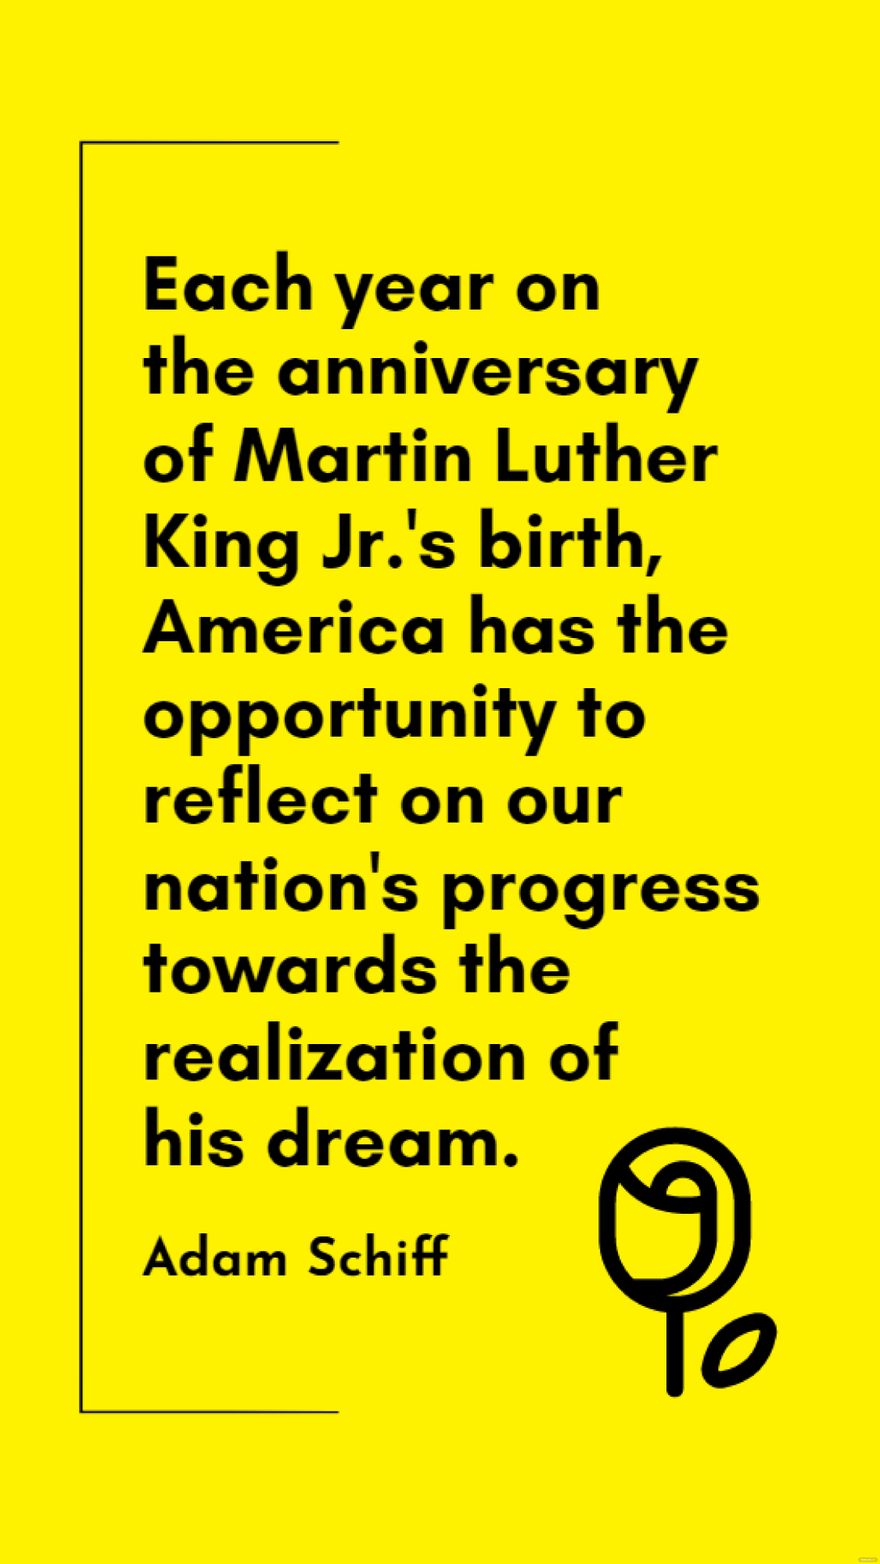 Adam Schiff - Each year on the anniversary of Martin Luther King Jr.'s birth, America has the opportunity to reflect on our nation's progress towards the realization of his dream.